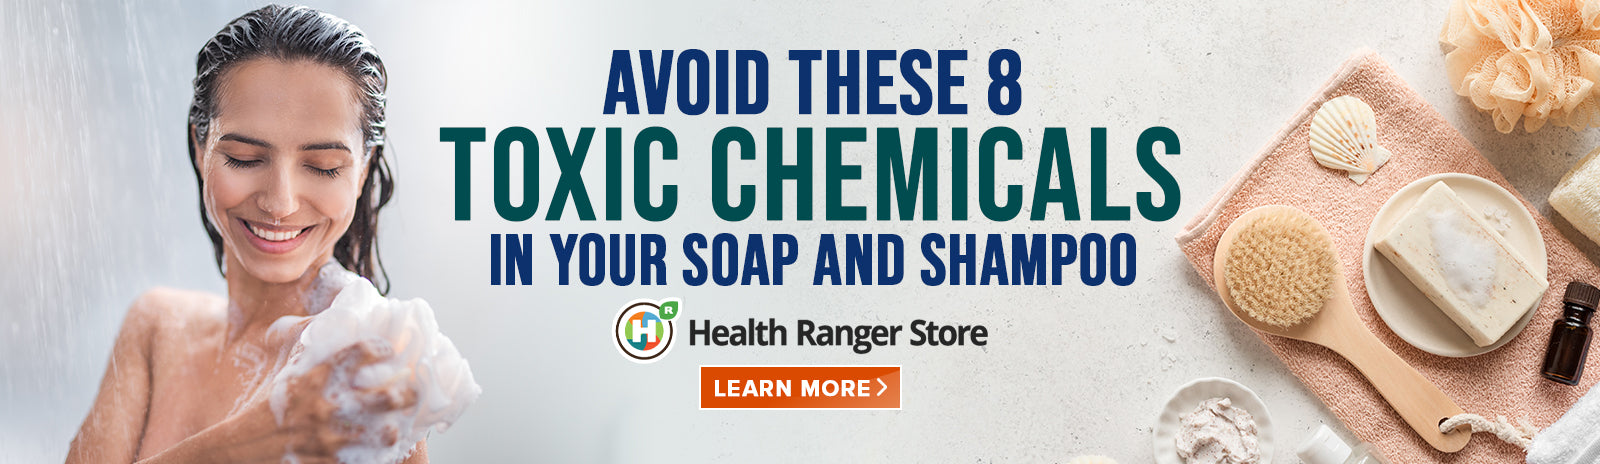 Avoid these 8 toxic chemicals in your soap and shampoo